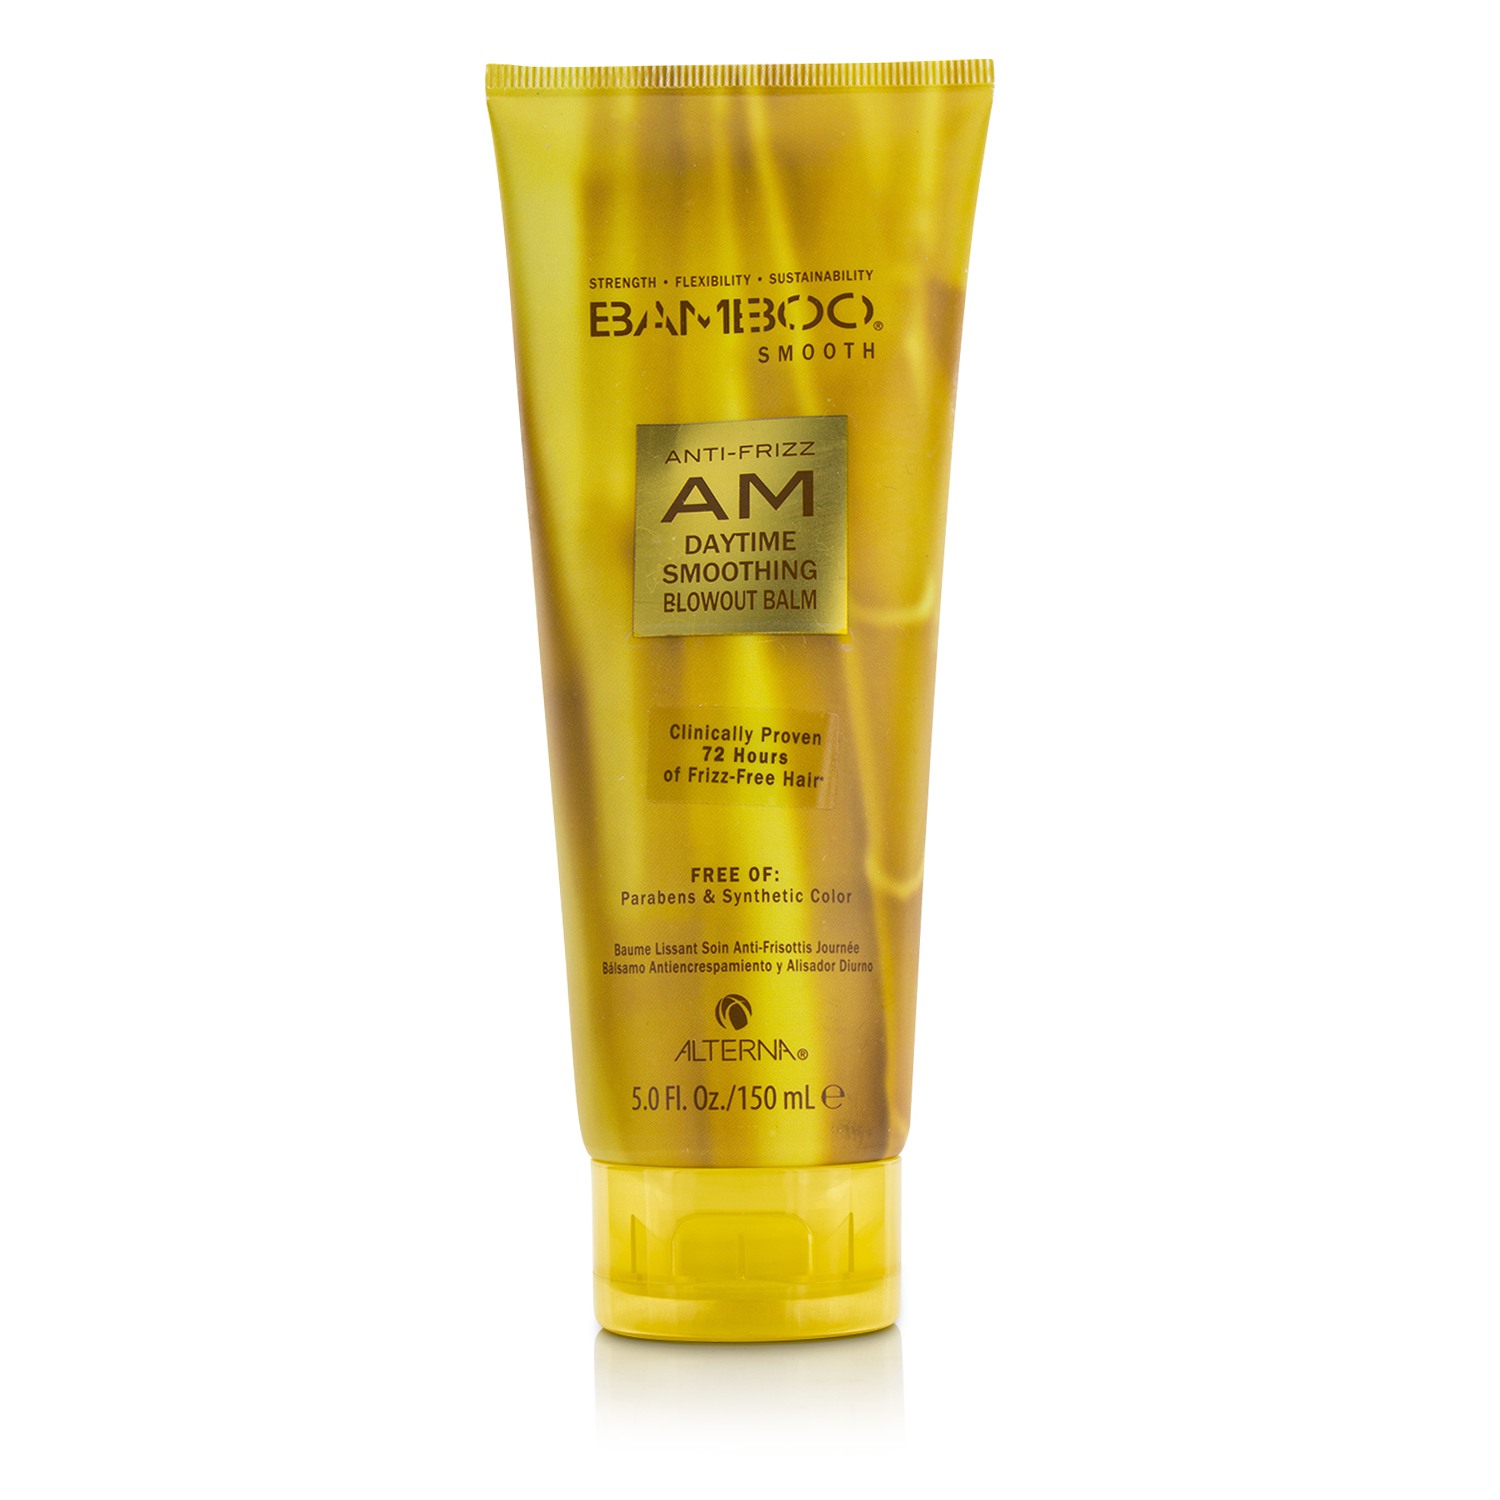 Bamboo Smooth Anti-Frizz AM Daytime Smoothing Blowout Balm Alterna Image